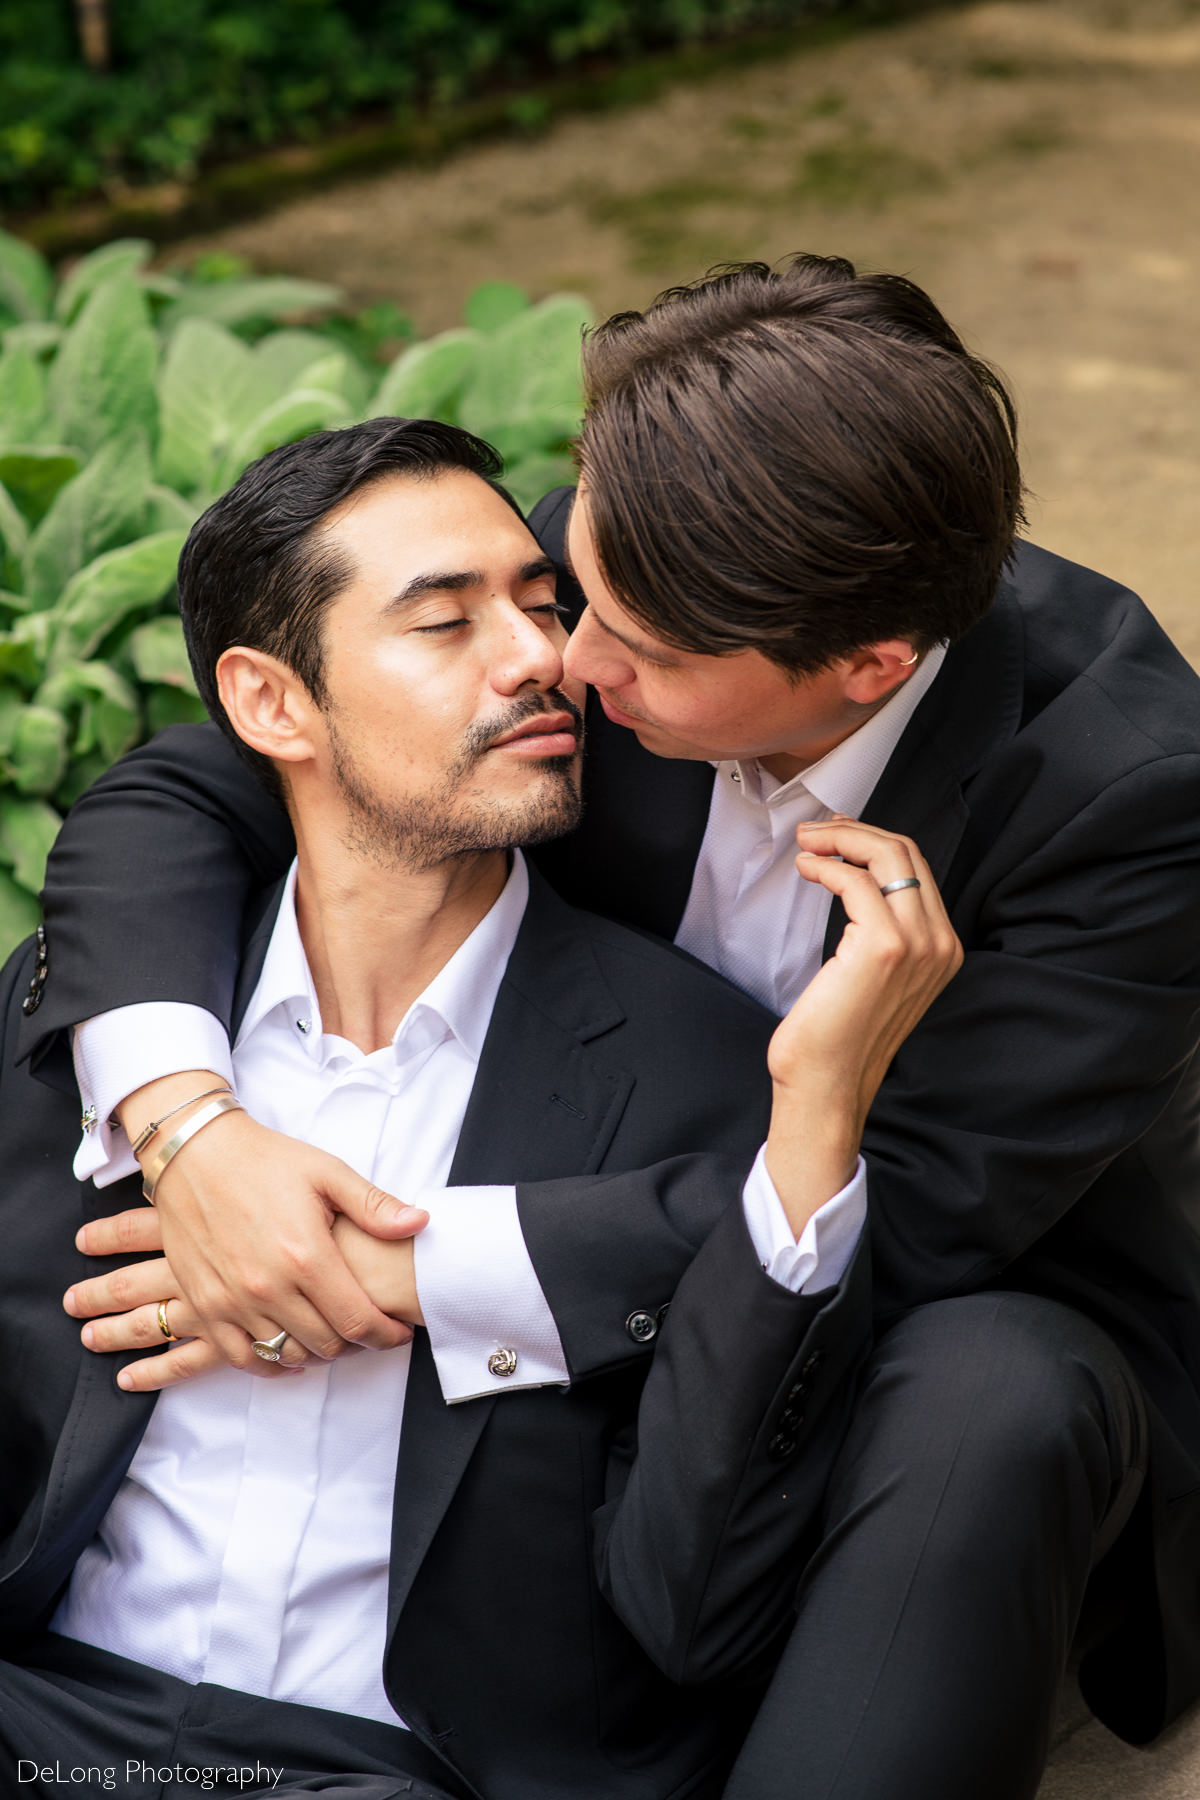 Same-sex couple sharing a tender moment before a kiss in the gardens of the Duke Mansion by Charlotte wedding photographers DeLong Photography